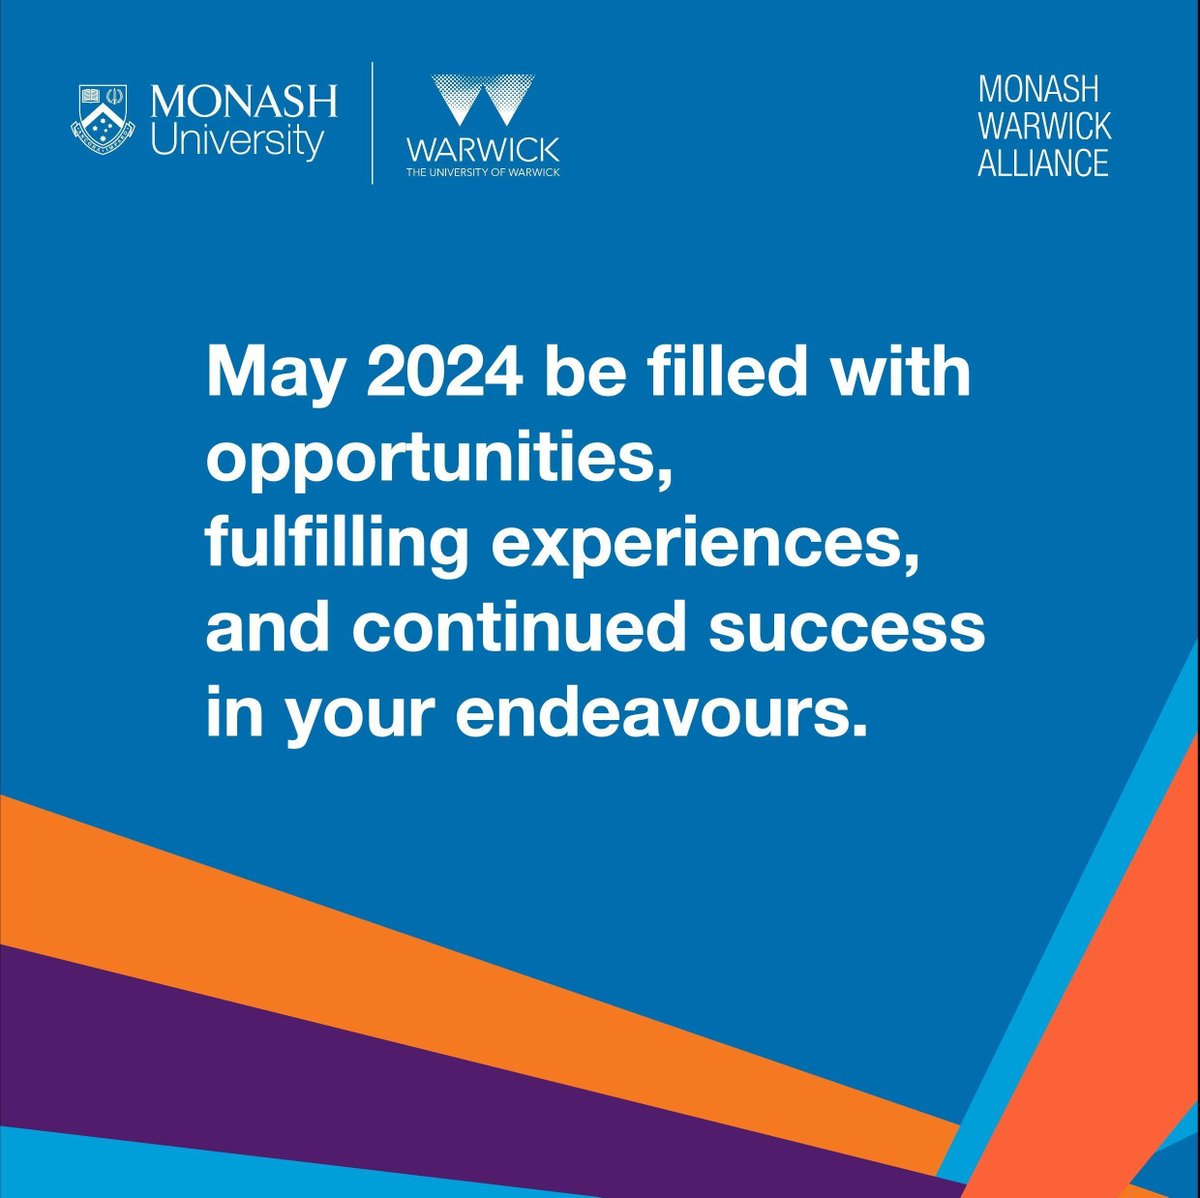 The Monash Warwick Alliance wishes everyone a happy 2024. In 2023, the Alliance continued to build partnerships, expand globally, and foster a vibrant community. Exciting developments are underway in 2024, so stay tuned for updates. #MWA2024